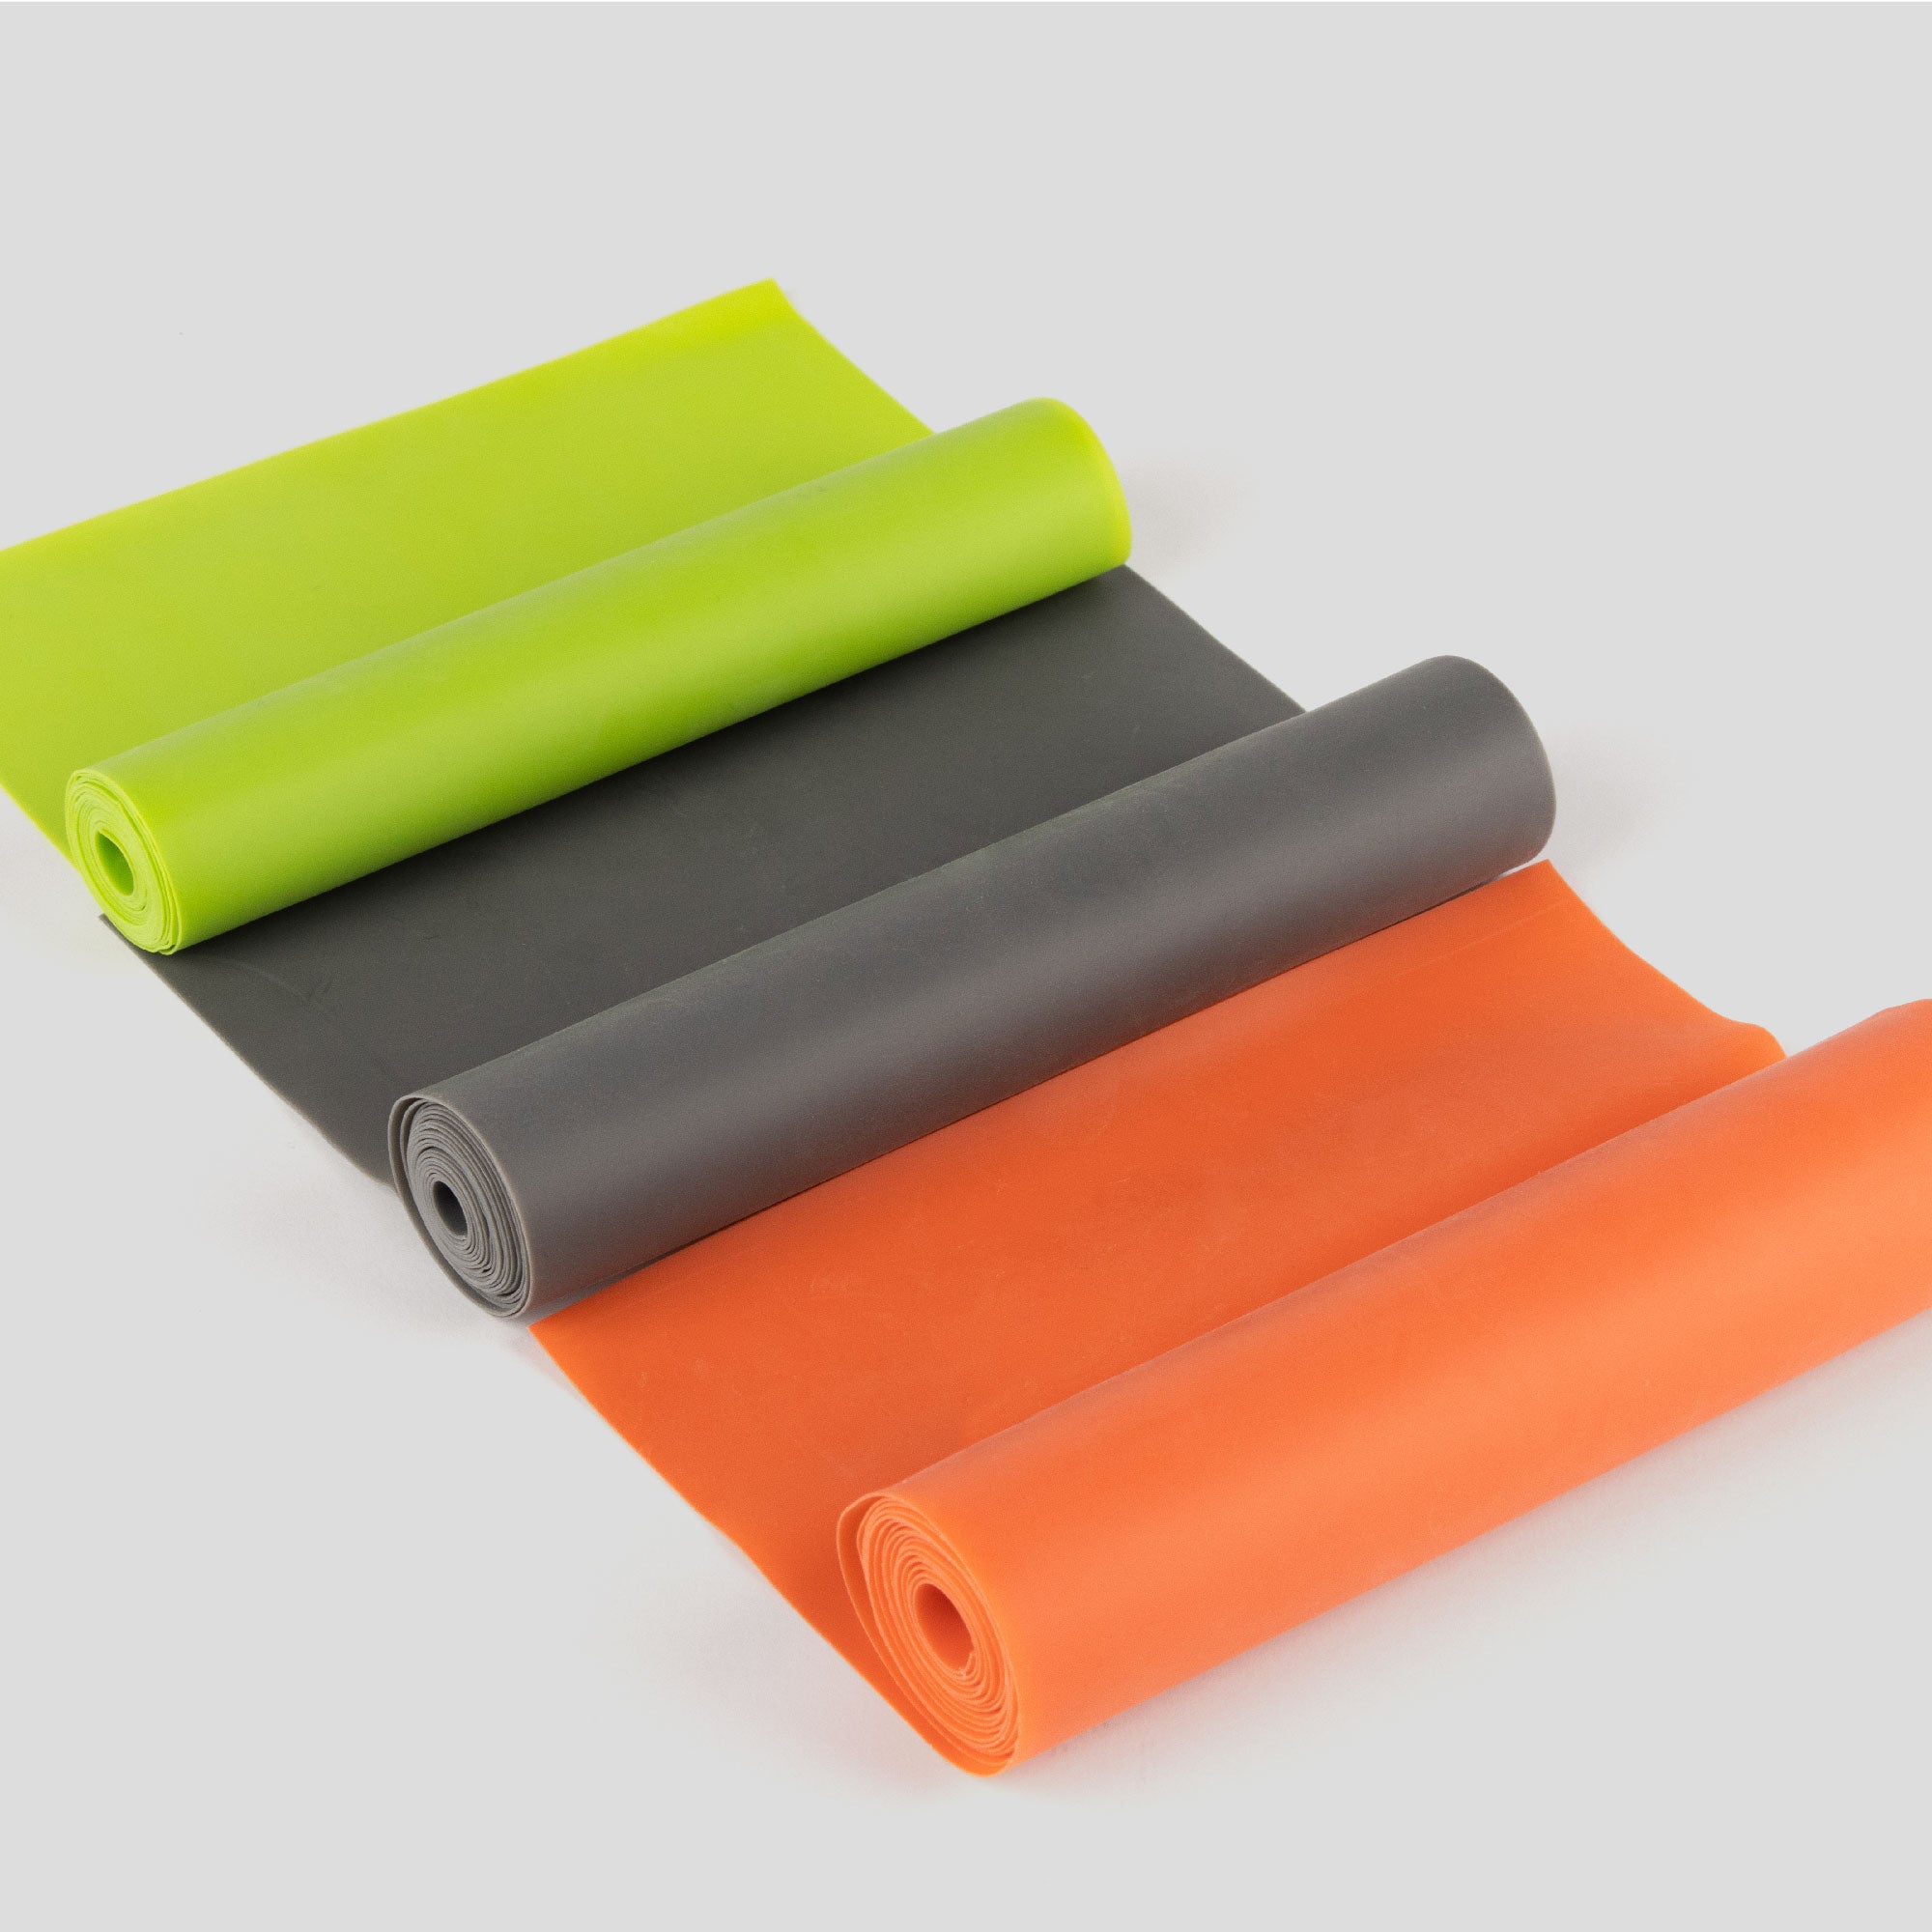 3 Pack Yoga Stretch Bands